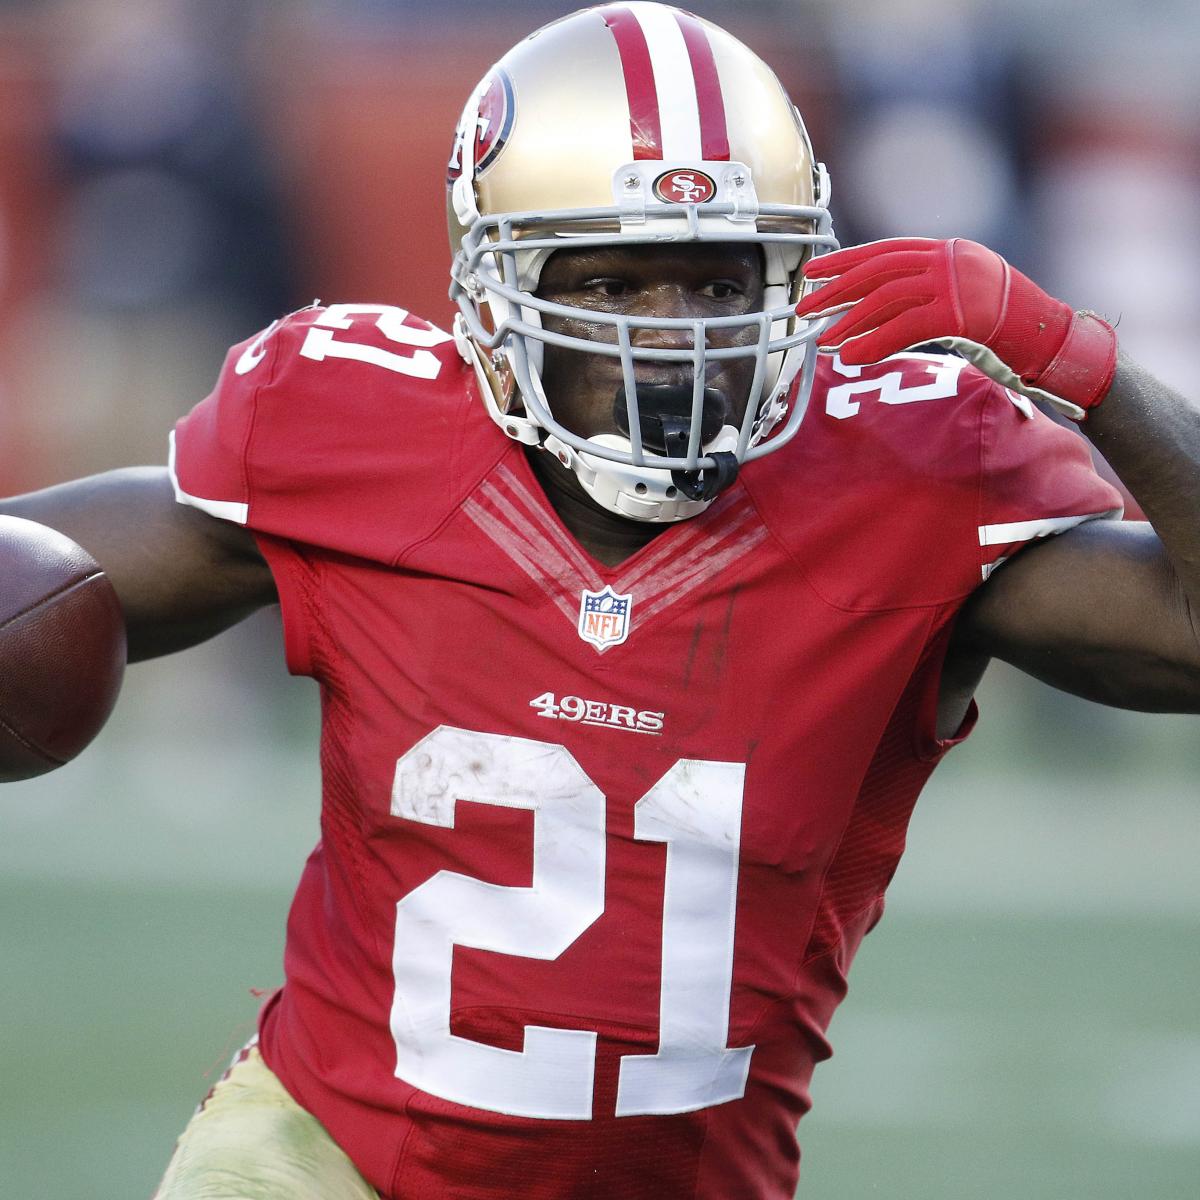 Frank Gore Says He’d Appreciate to Return to 49ers in Free Agency This Offseason